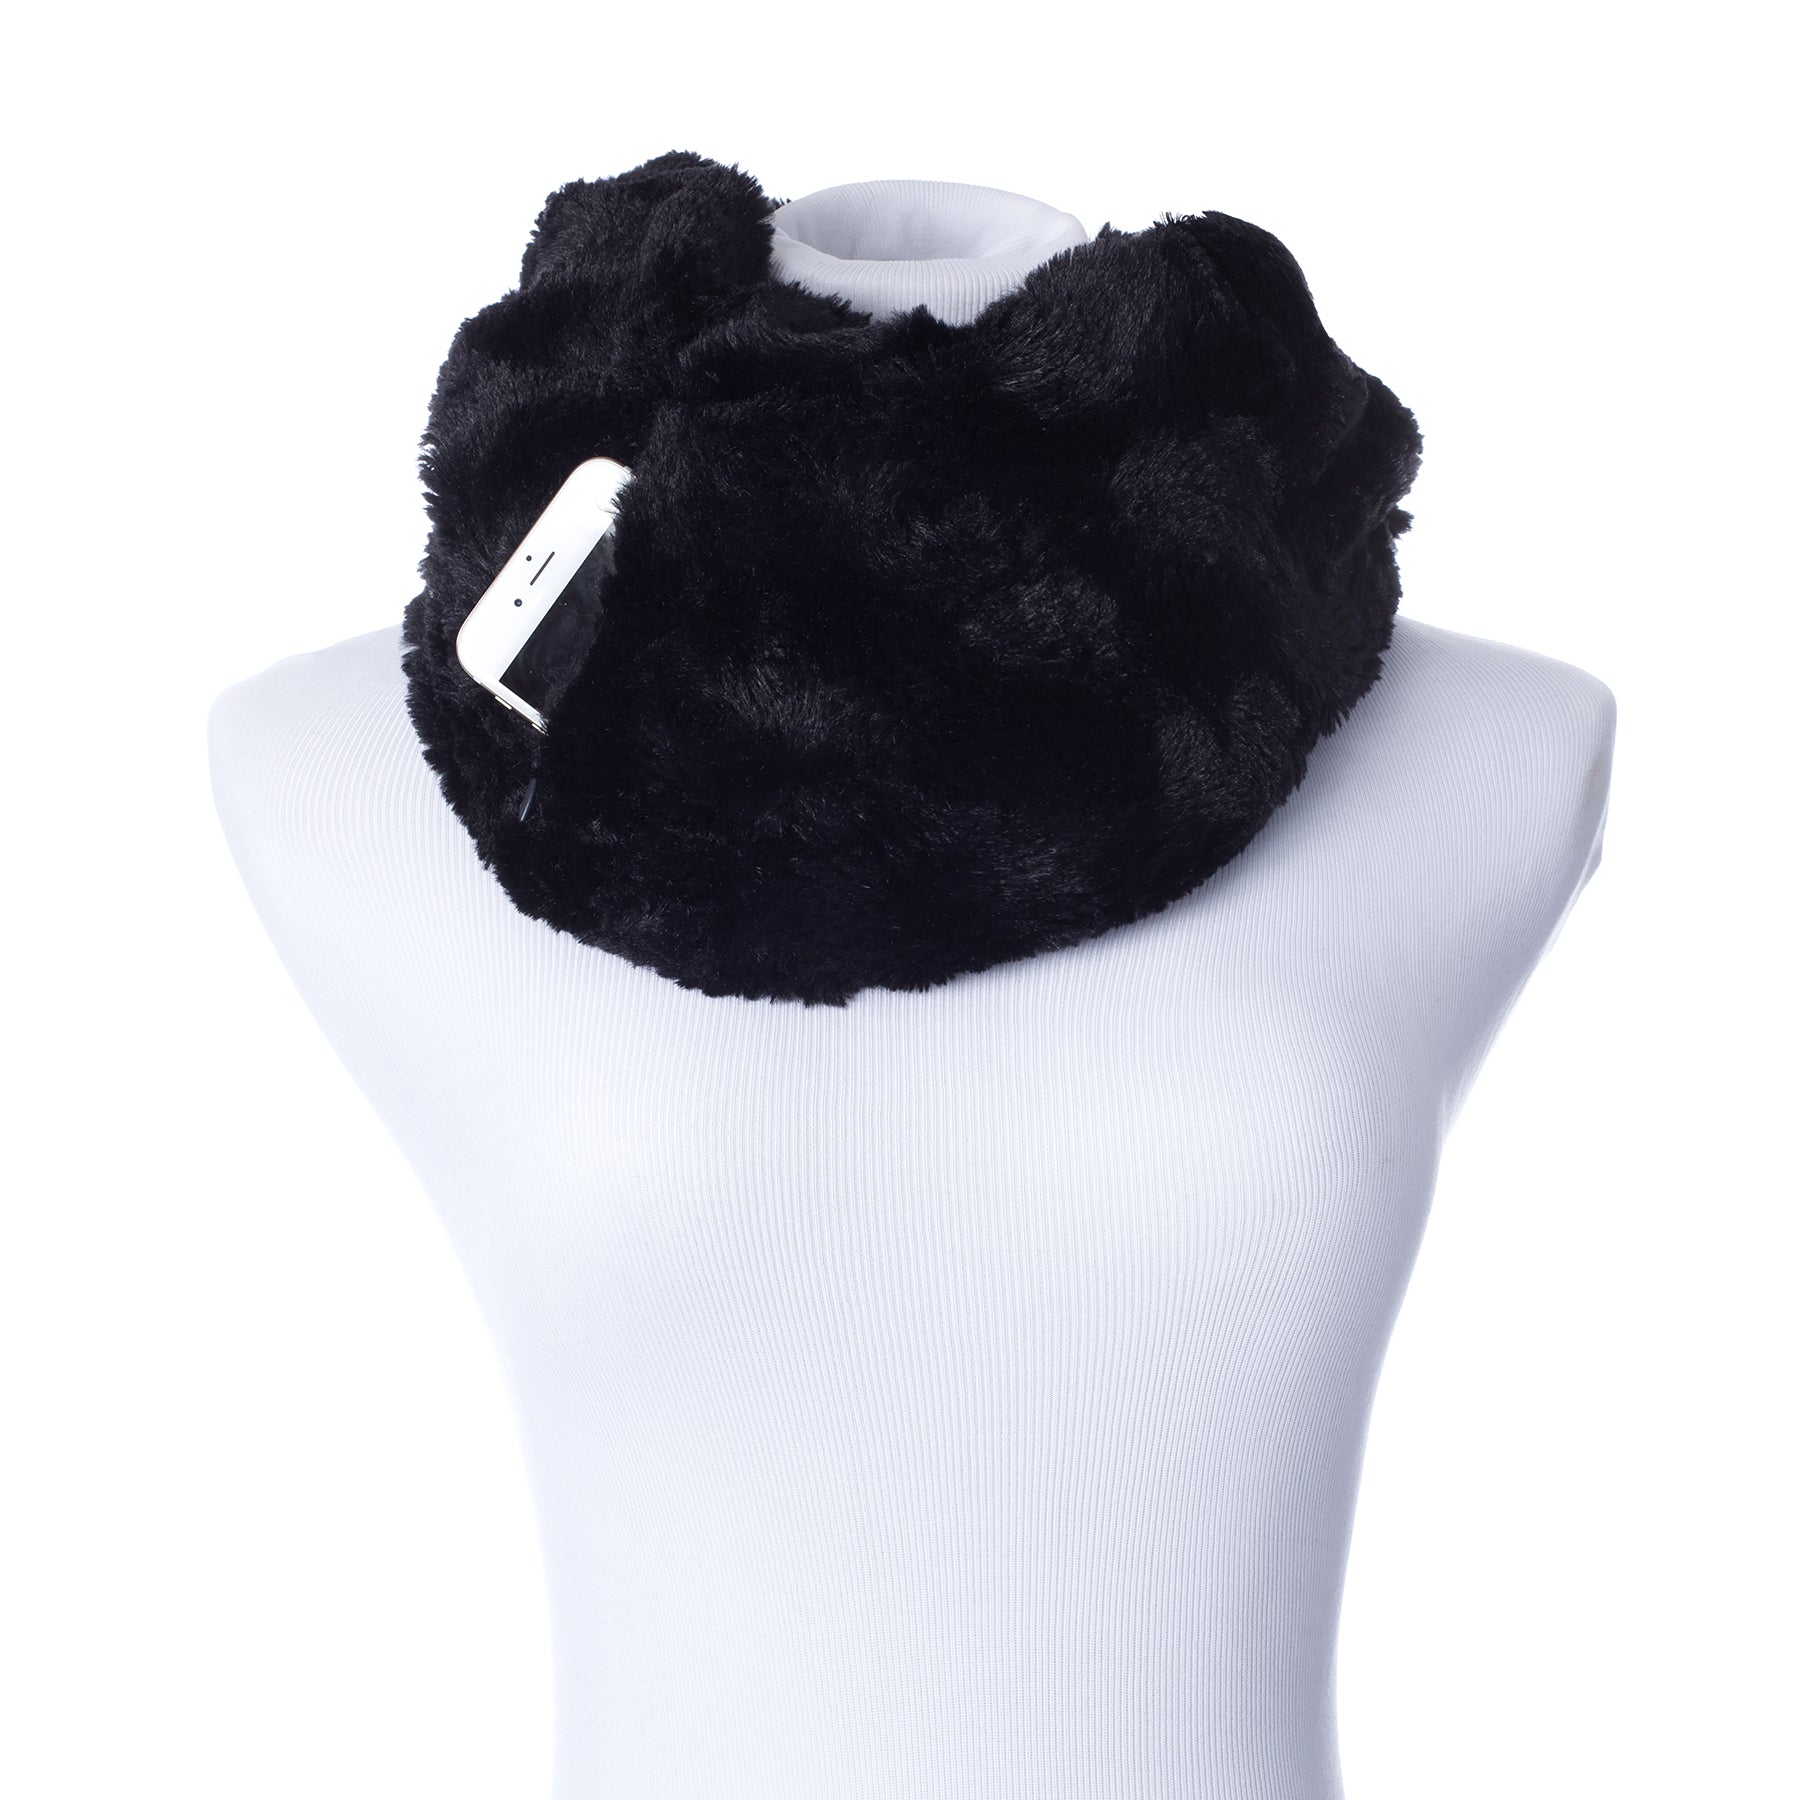 Black Ultra Soft & Silky Faux Fur Infinity Scarf With Hidden Pocket